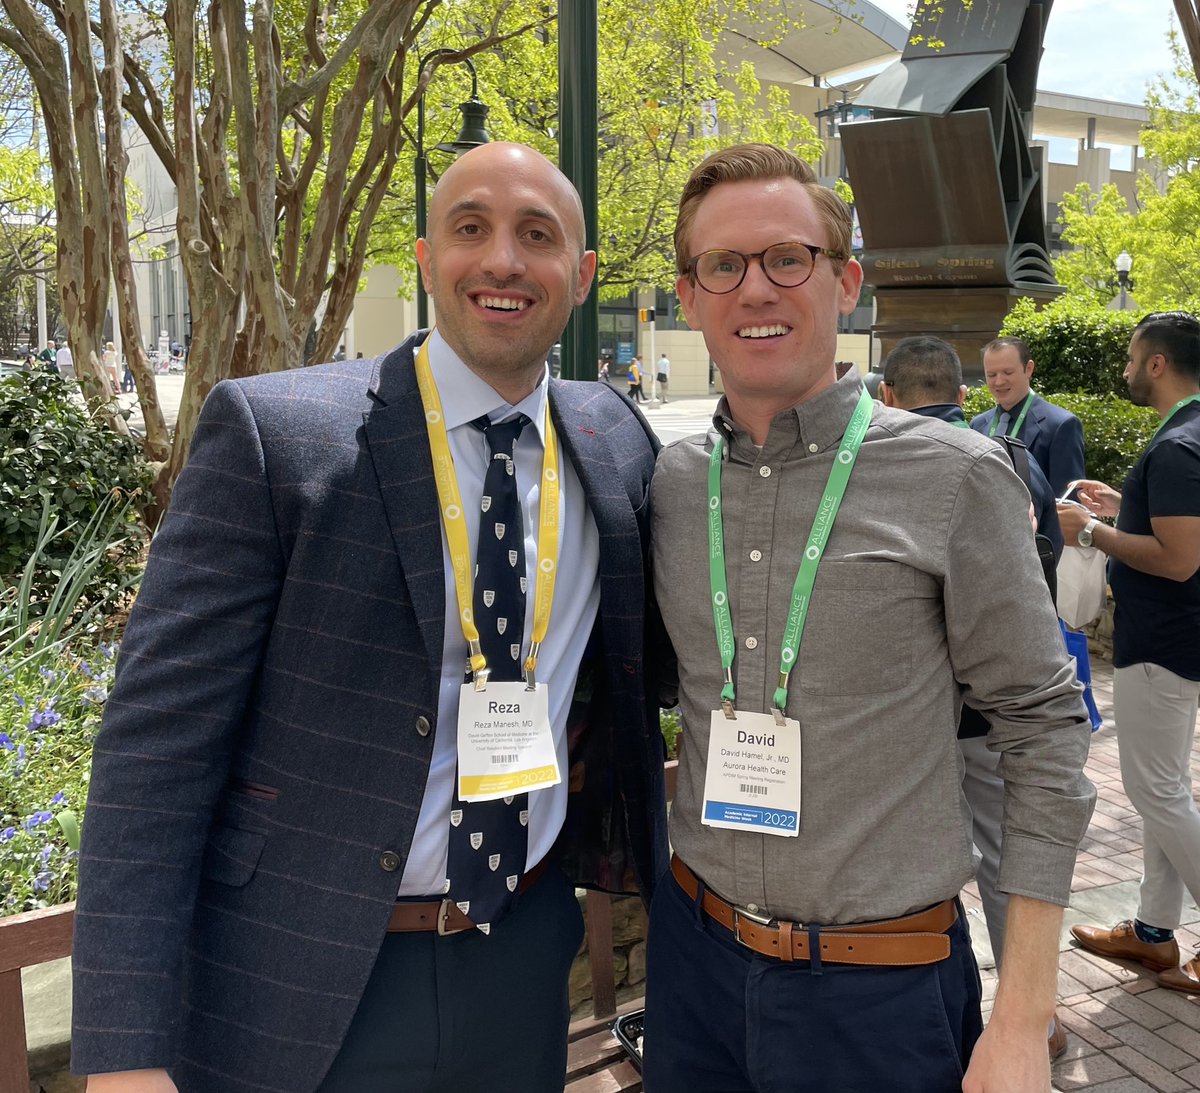 Told my Chiefs, “If the choice is session or old friends, choose old friends.” Thanks for hanging out with me at lunch, Prof Rez! @DxRxEdu #AIMW22